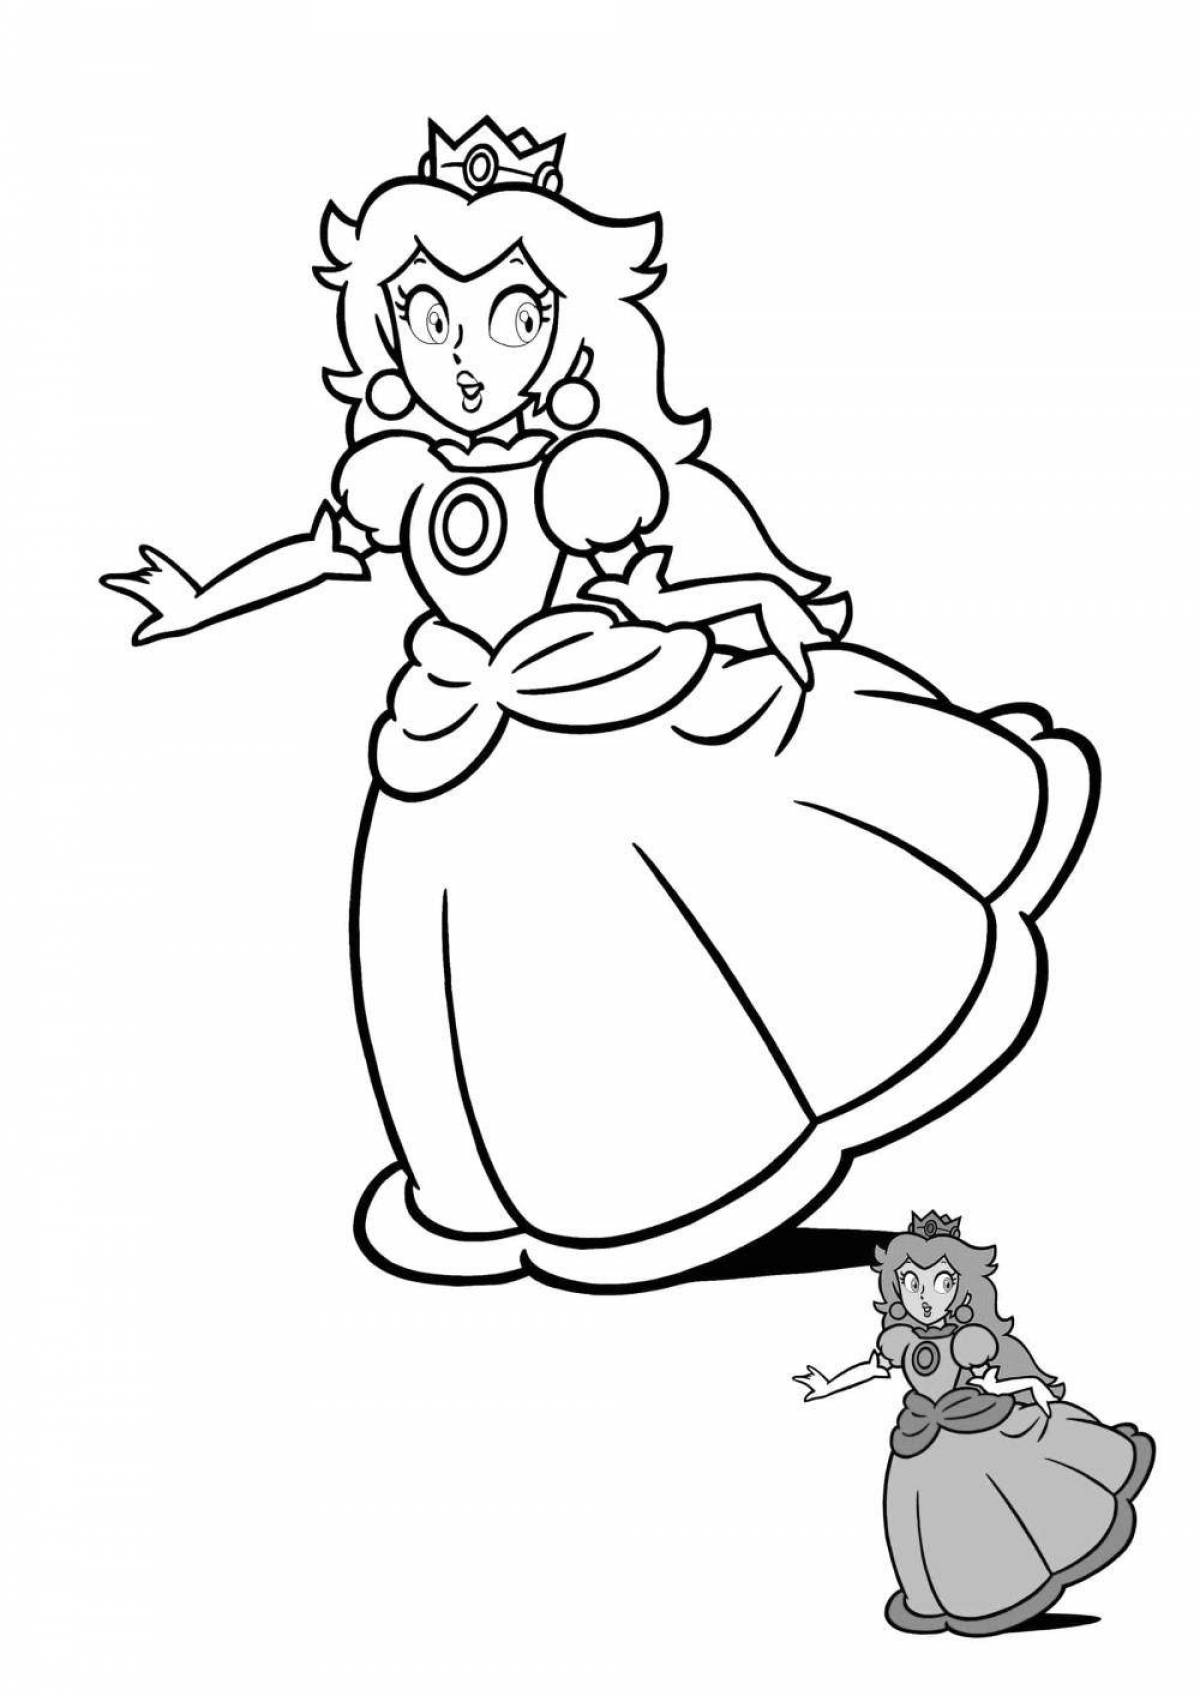 Peach blossom coloring page